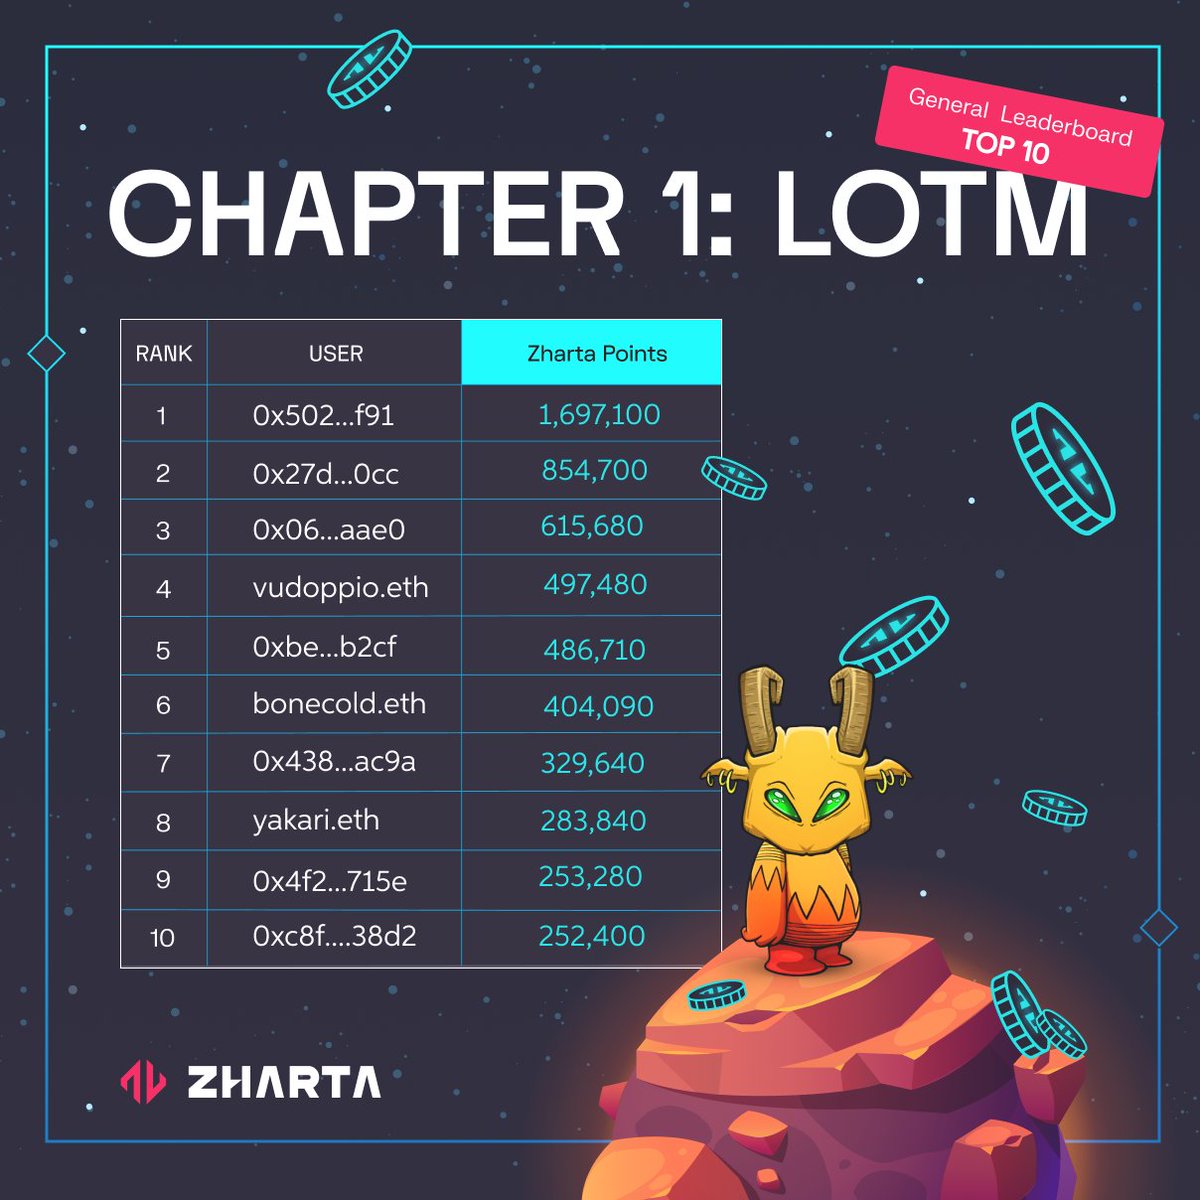 Chapter 1's top 10 ranking update 🔥 yakari.eth moved up to 8th position! 🚀